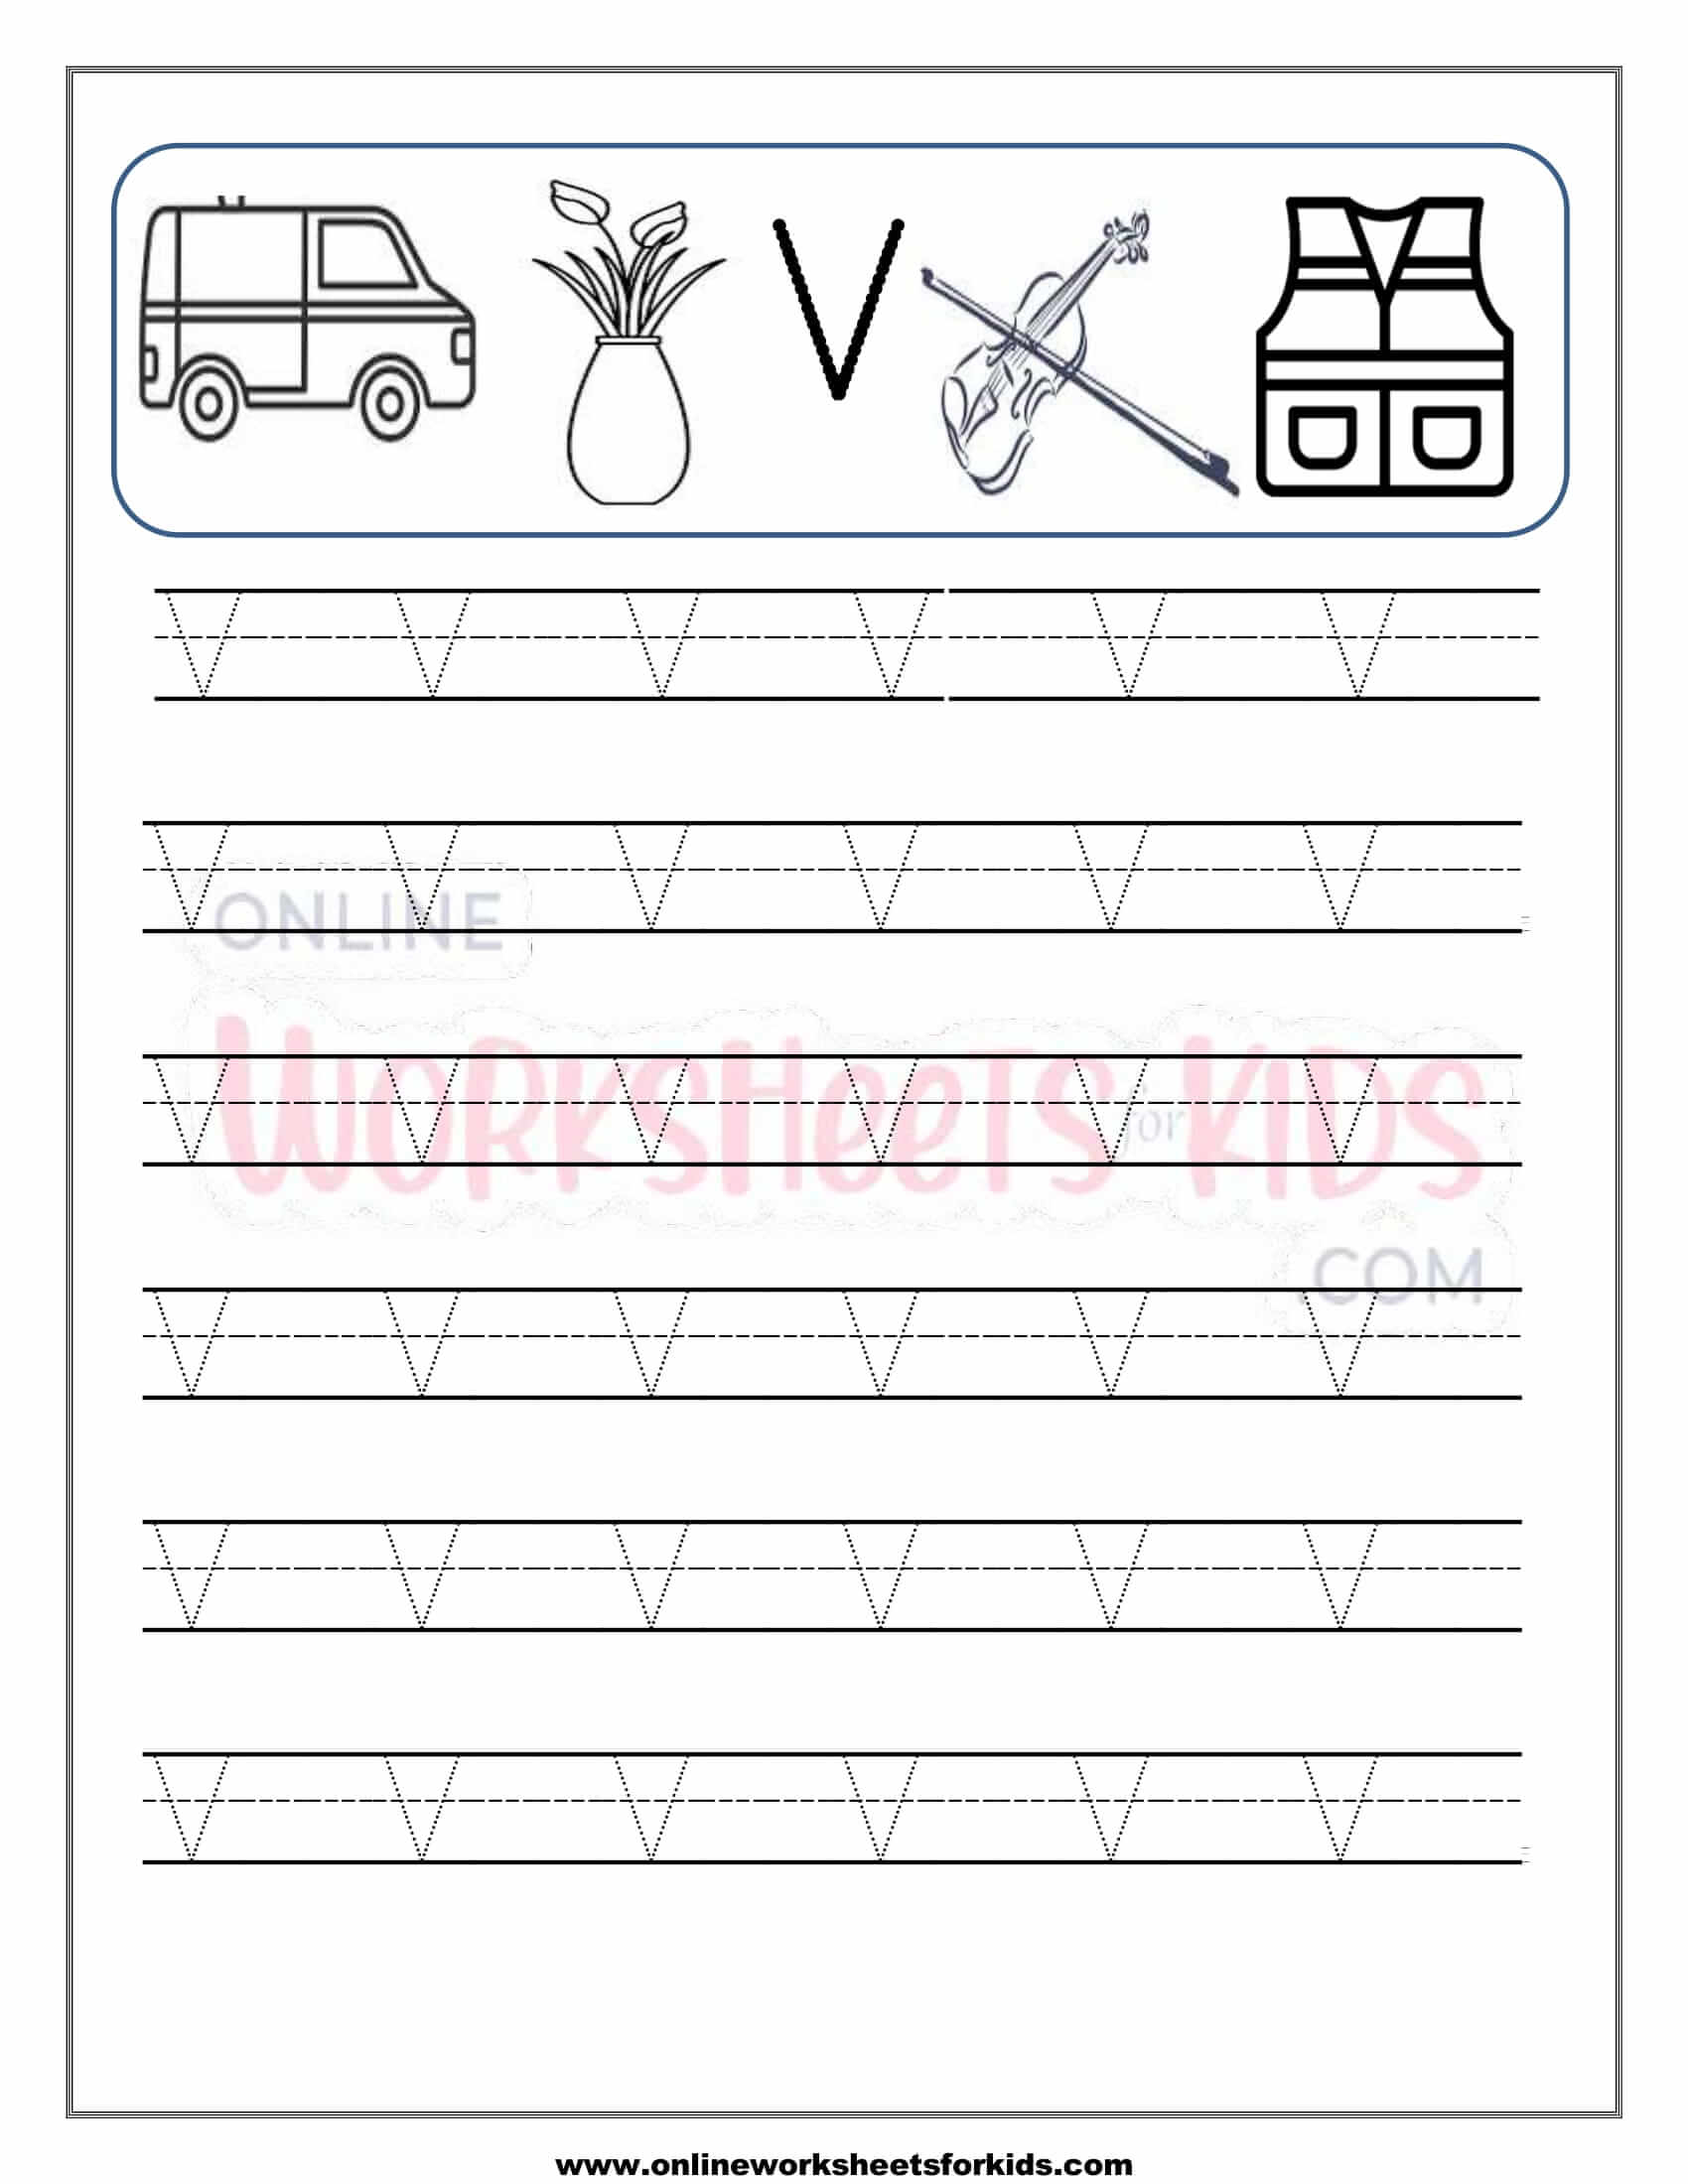 letter-tracing-worksheet-capital-letters-22